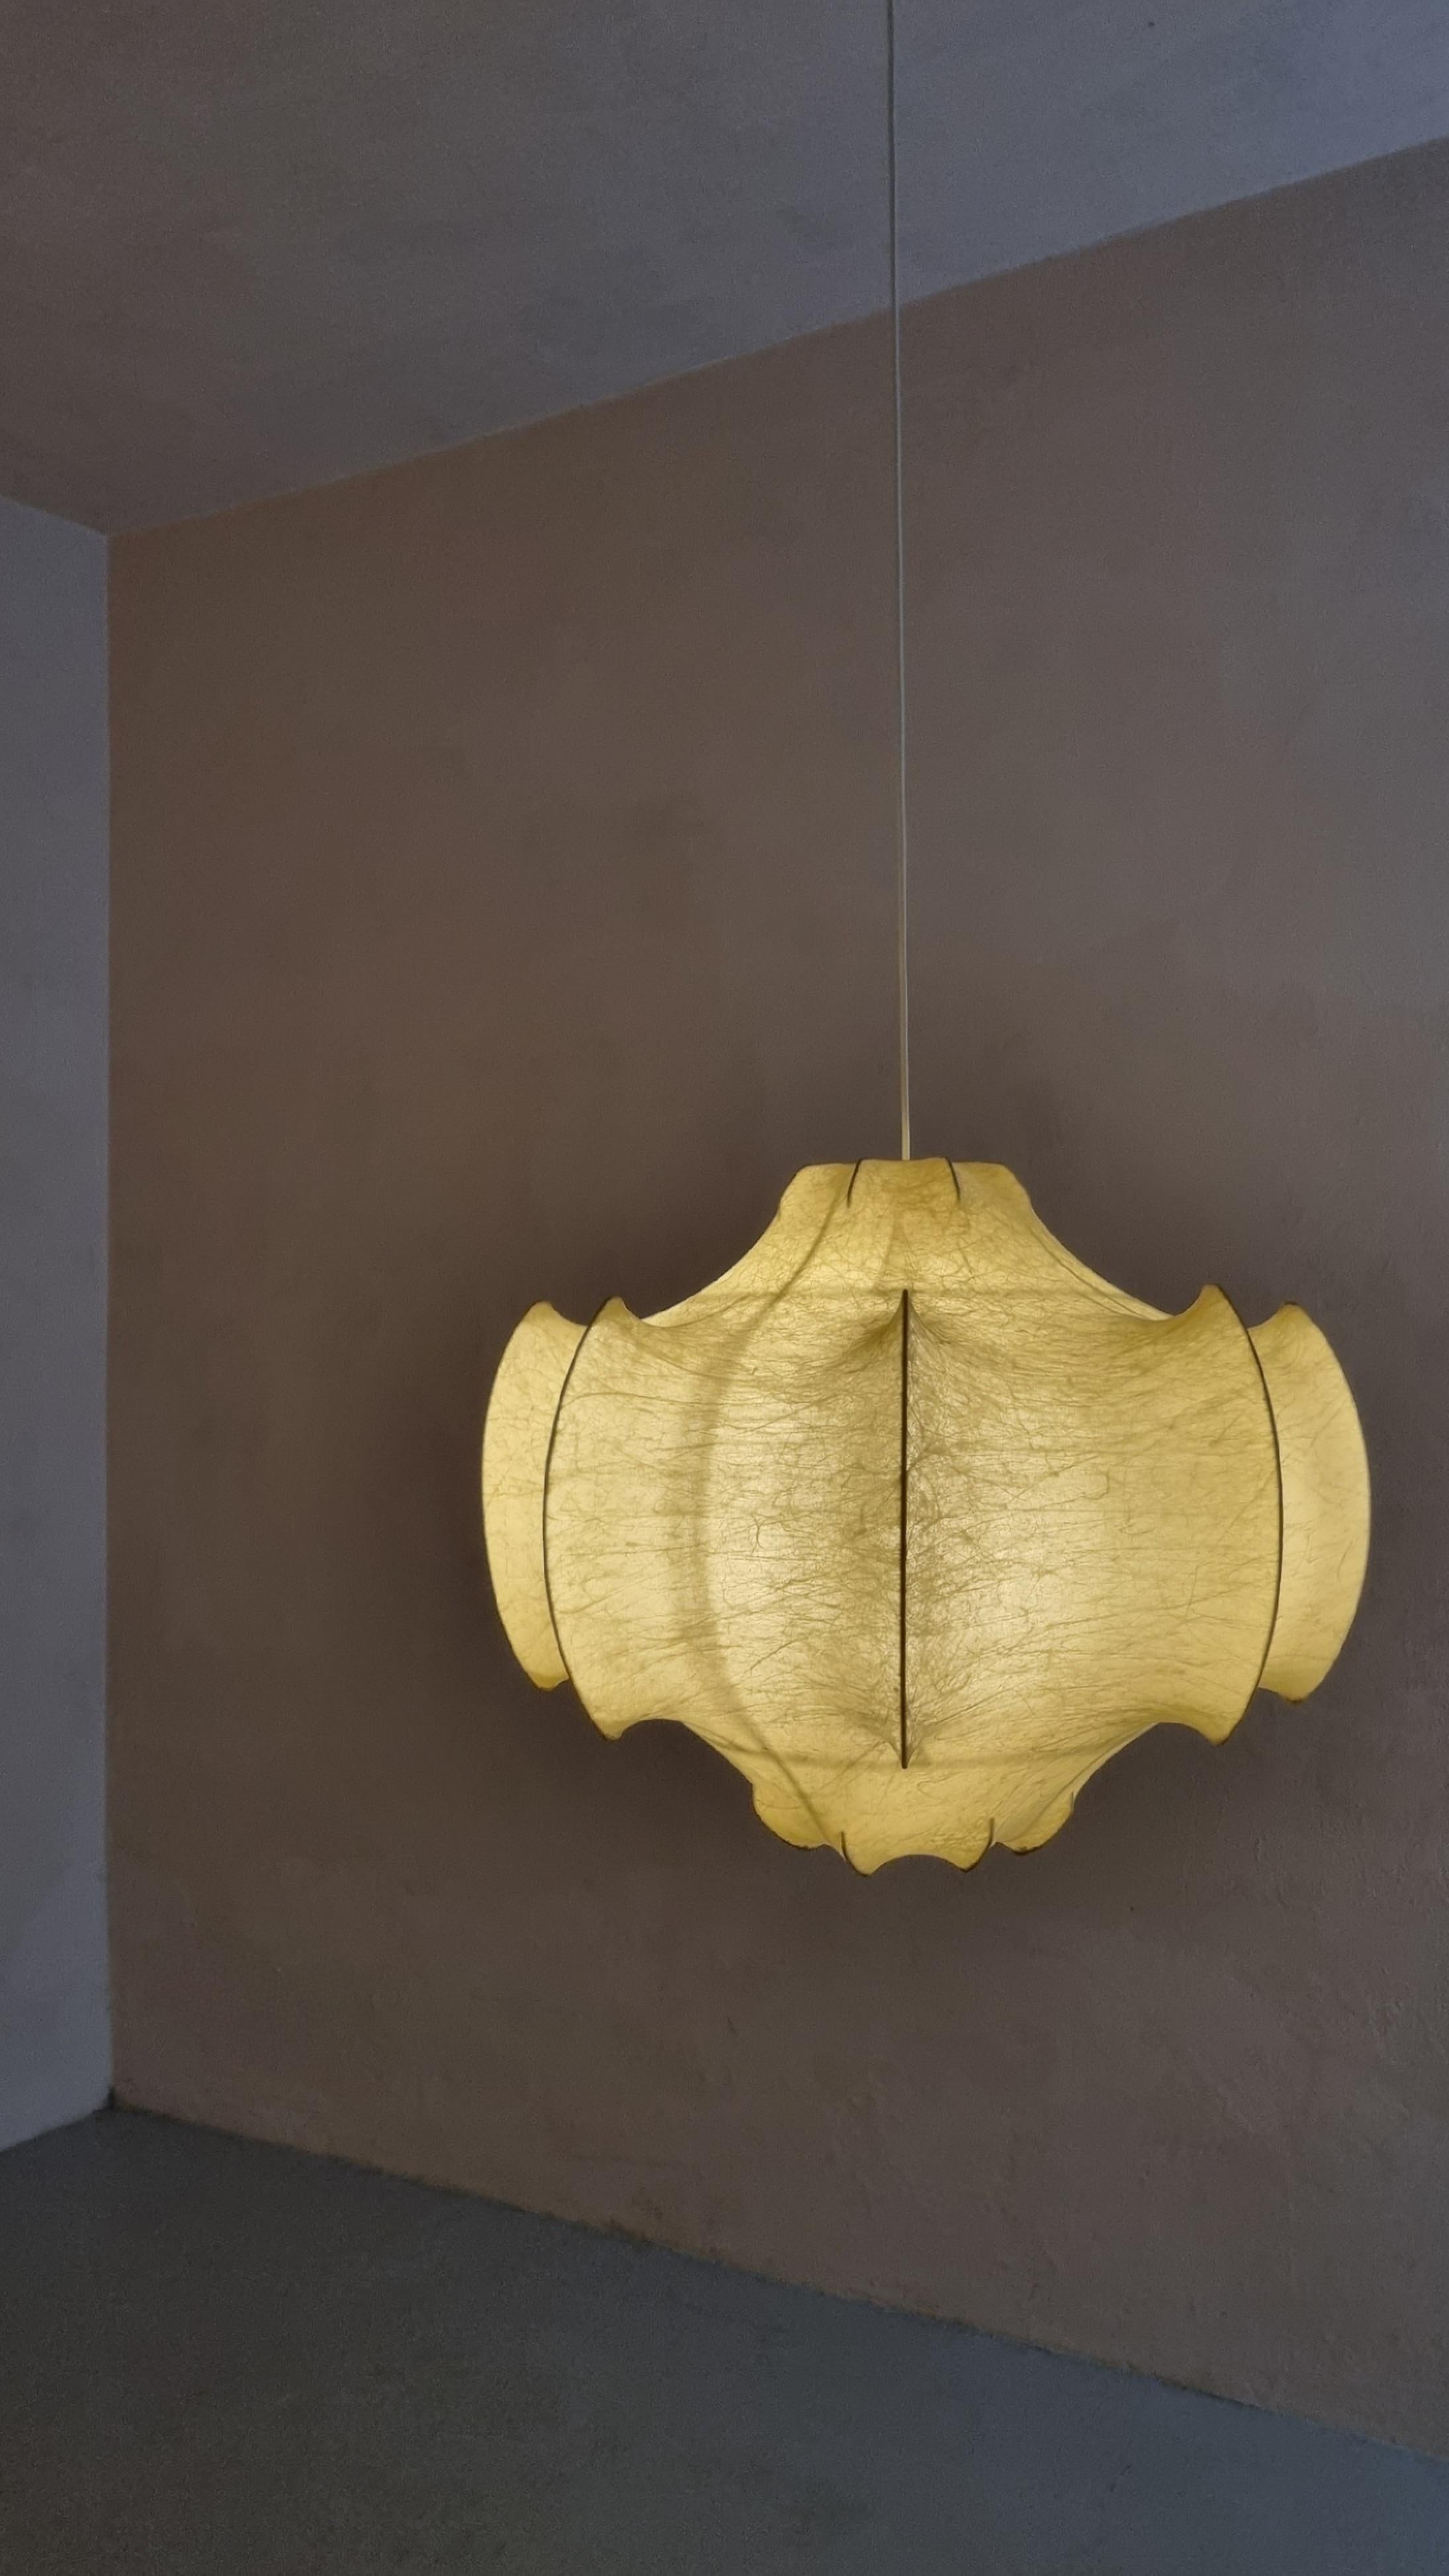 Viscontea pendant lamp by Achille and Piergiacomo Castiglioni for Flos, 1960. 
Original piece of the 60s, despite the fragility of the material, this Viscontea pendant lamp is in excellent vintage condition, and the lamp is complete with the brass